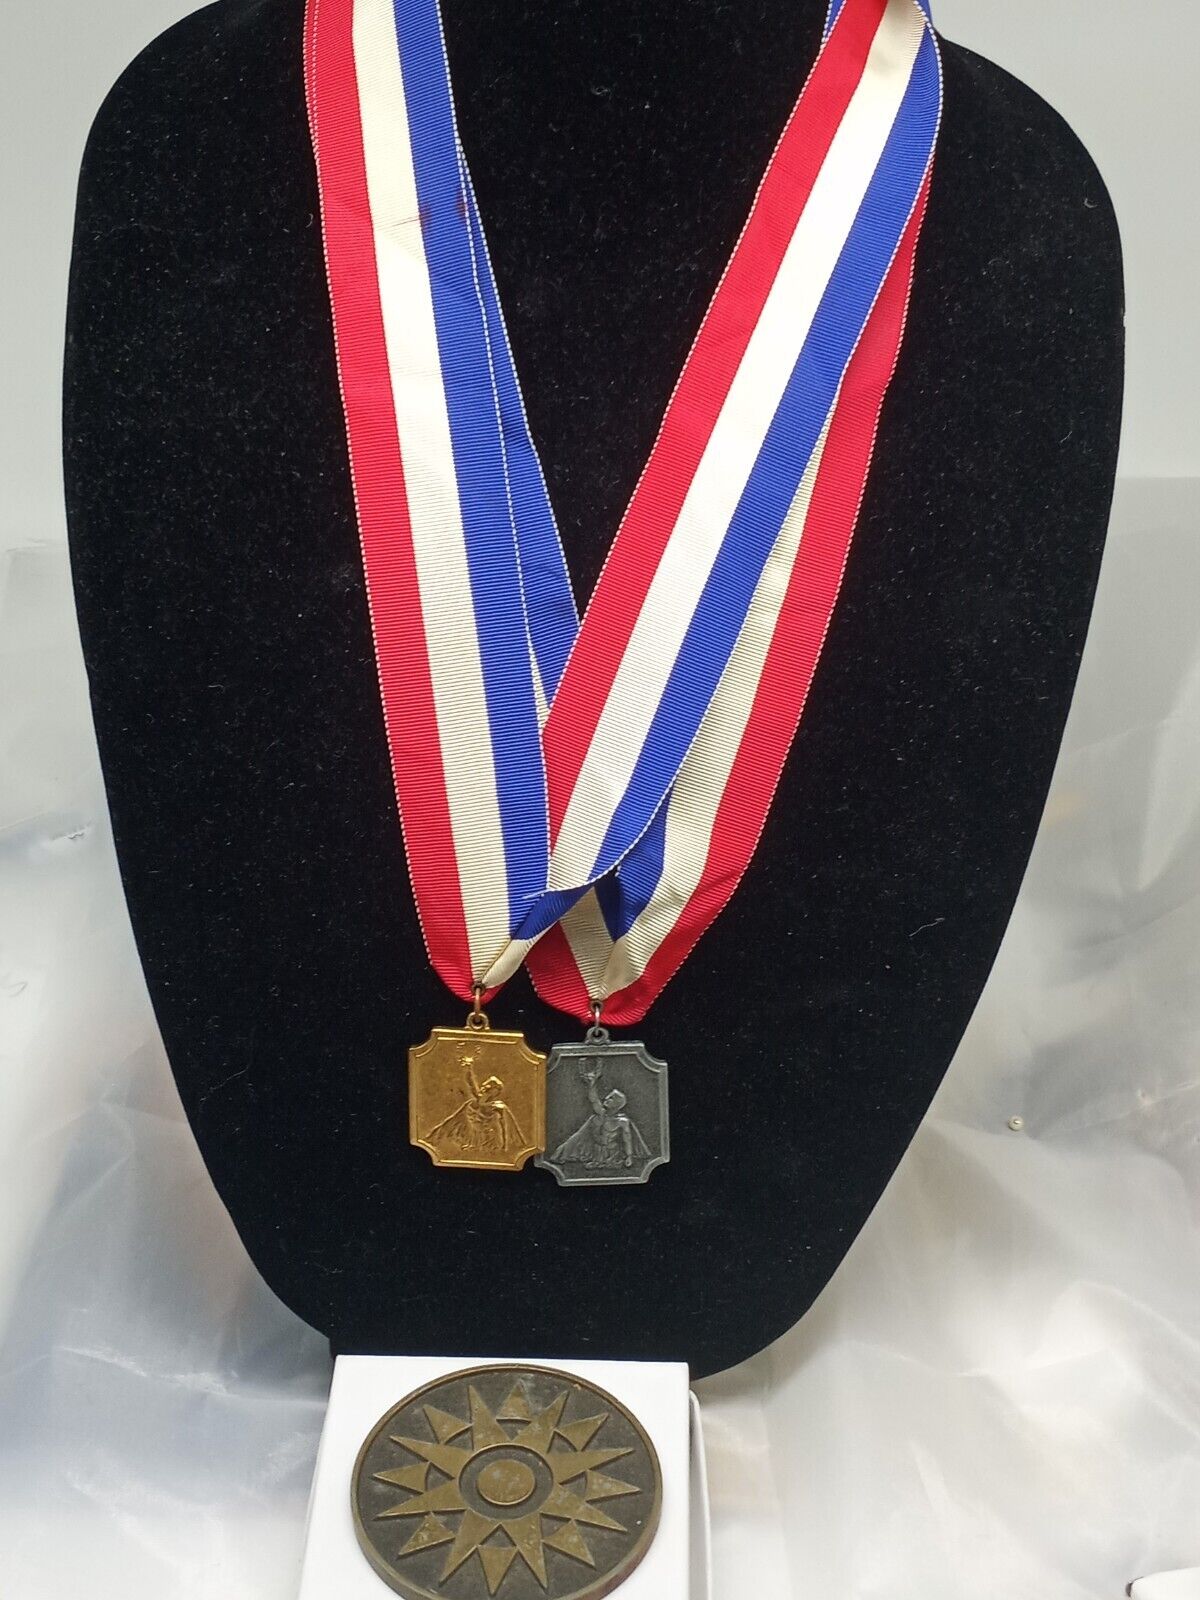 Vintage Ibm Medals With Ribbons 1st Ibm Olympiad And Western Region 1966...